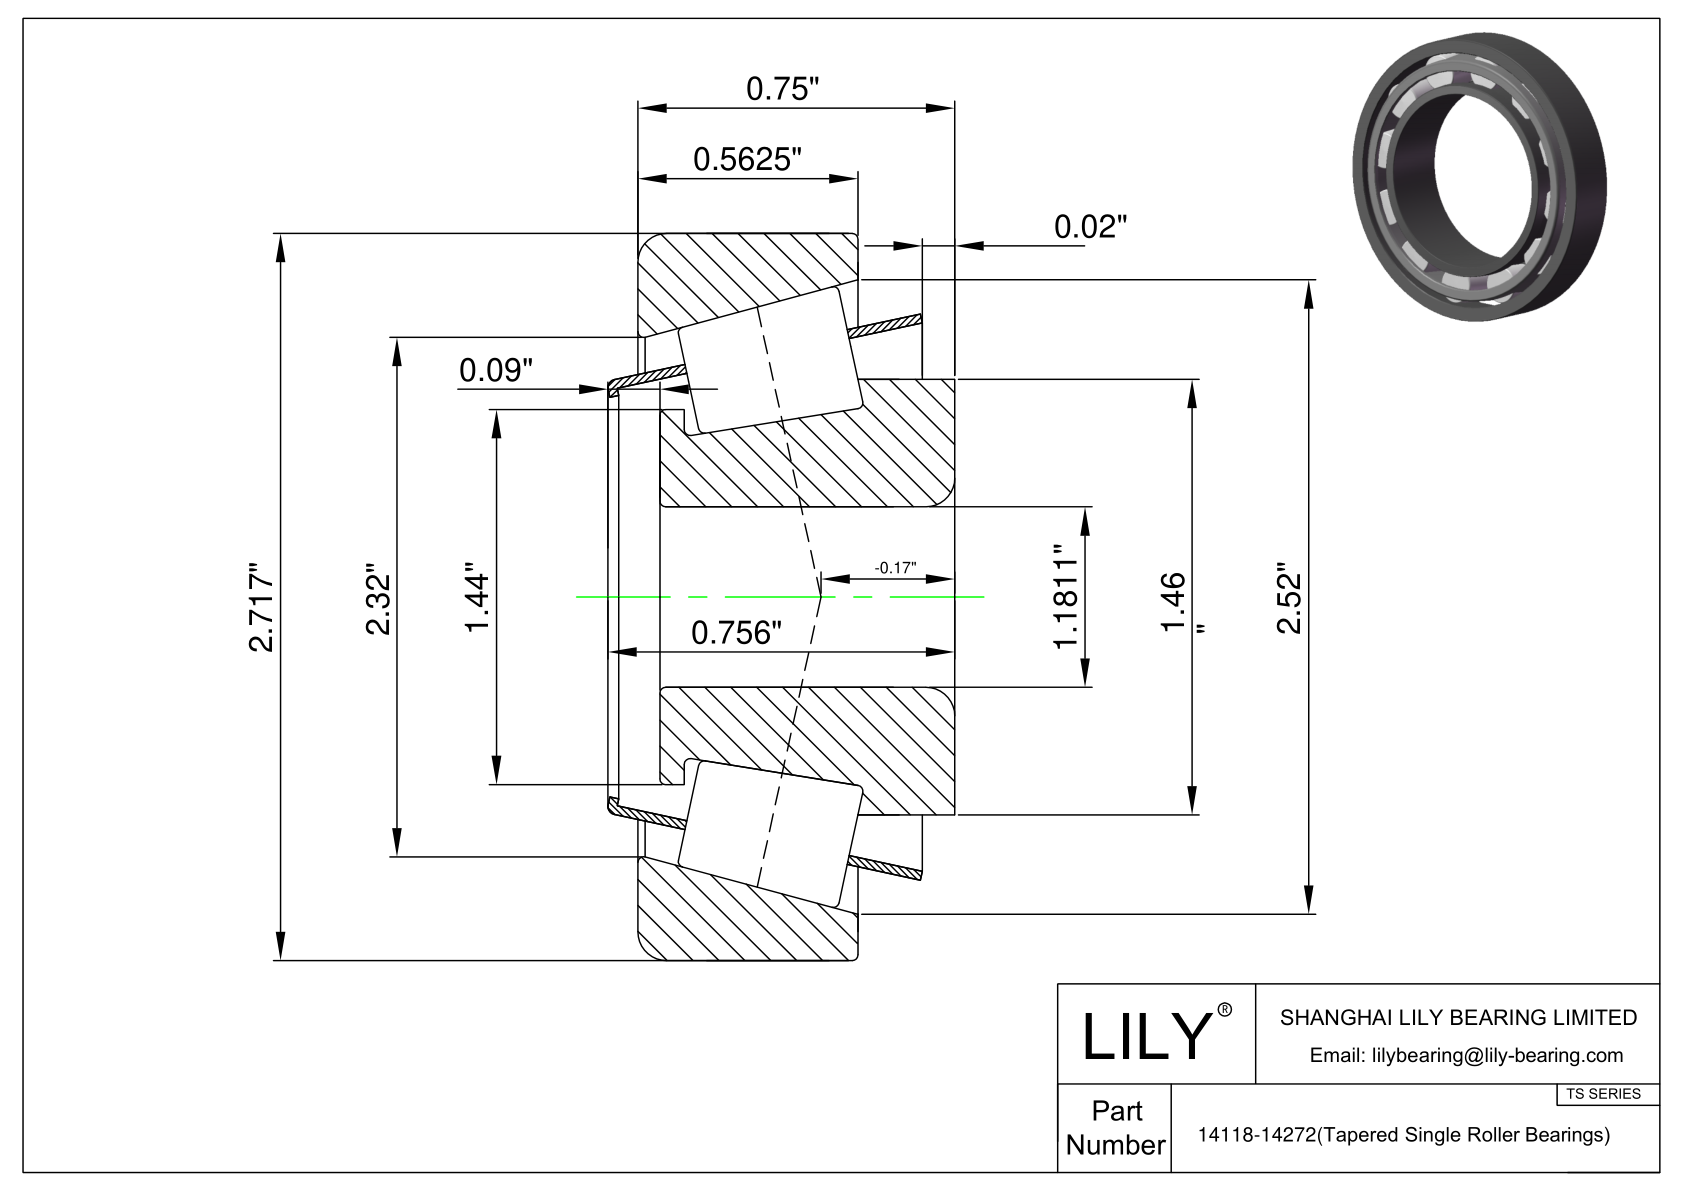 14118-14272 TS (Tapered Single Roller Bearings) (Imperial) cad drawing